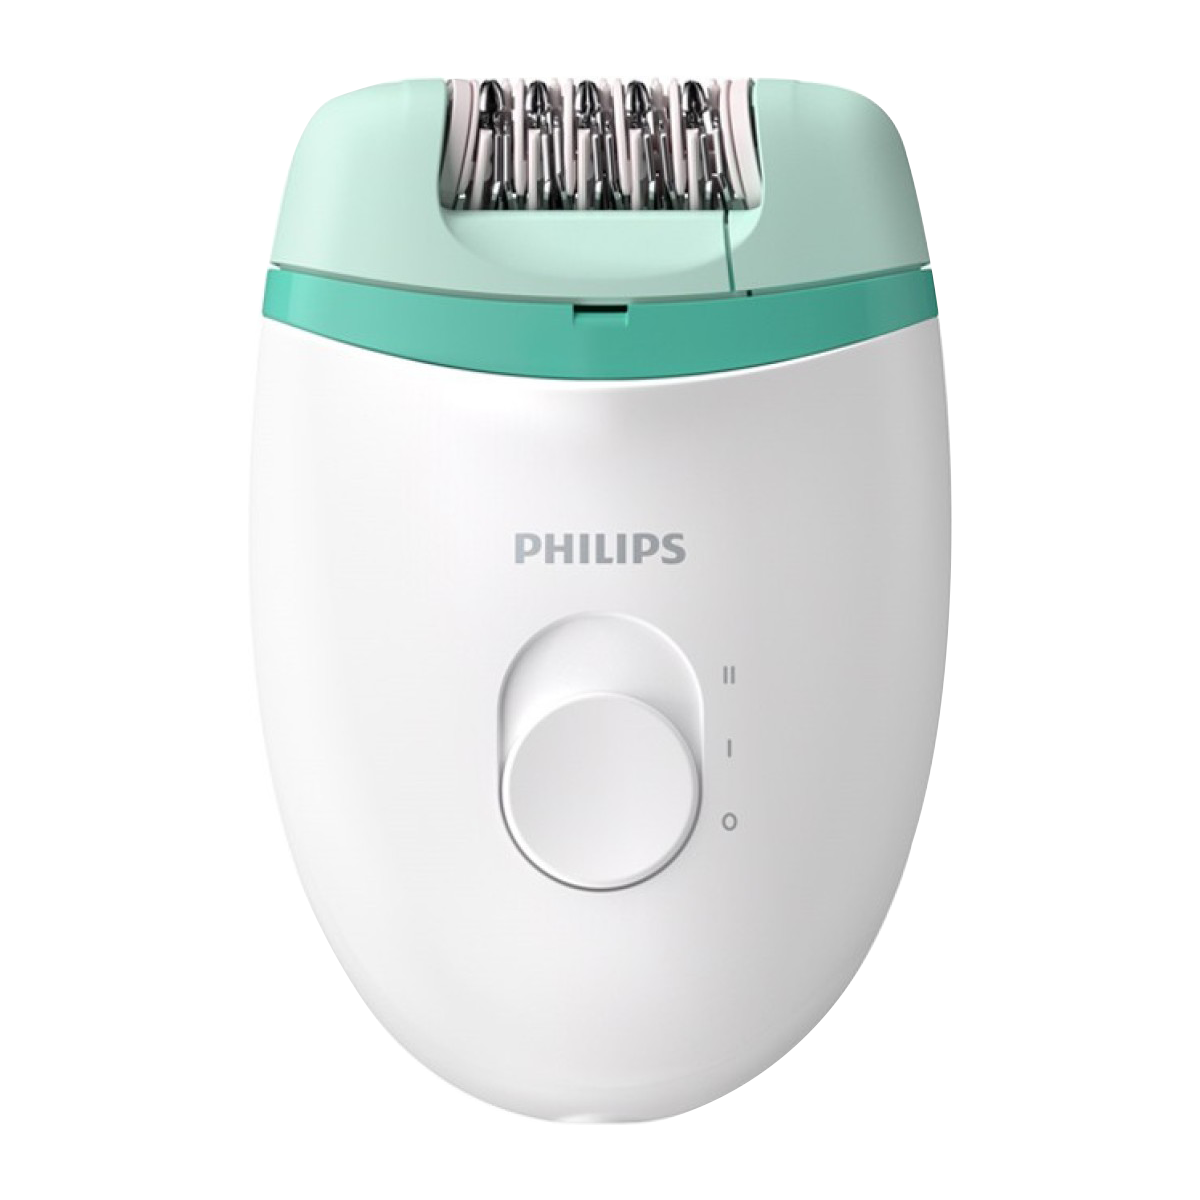 Philips Satinelle Essential Corded Epilator (Compact, BRE245/00, White/Green)